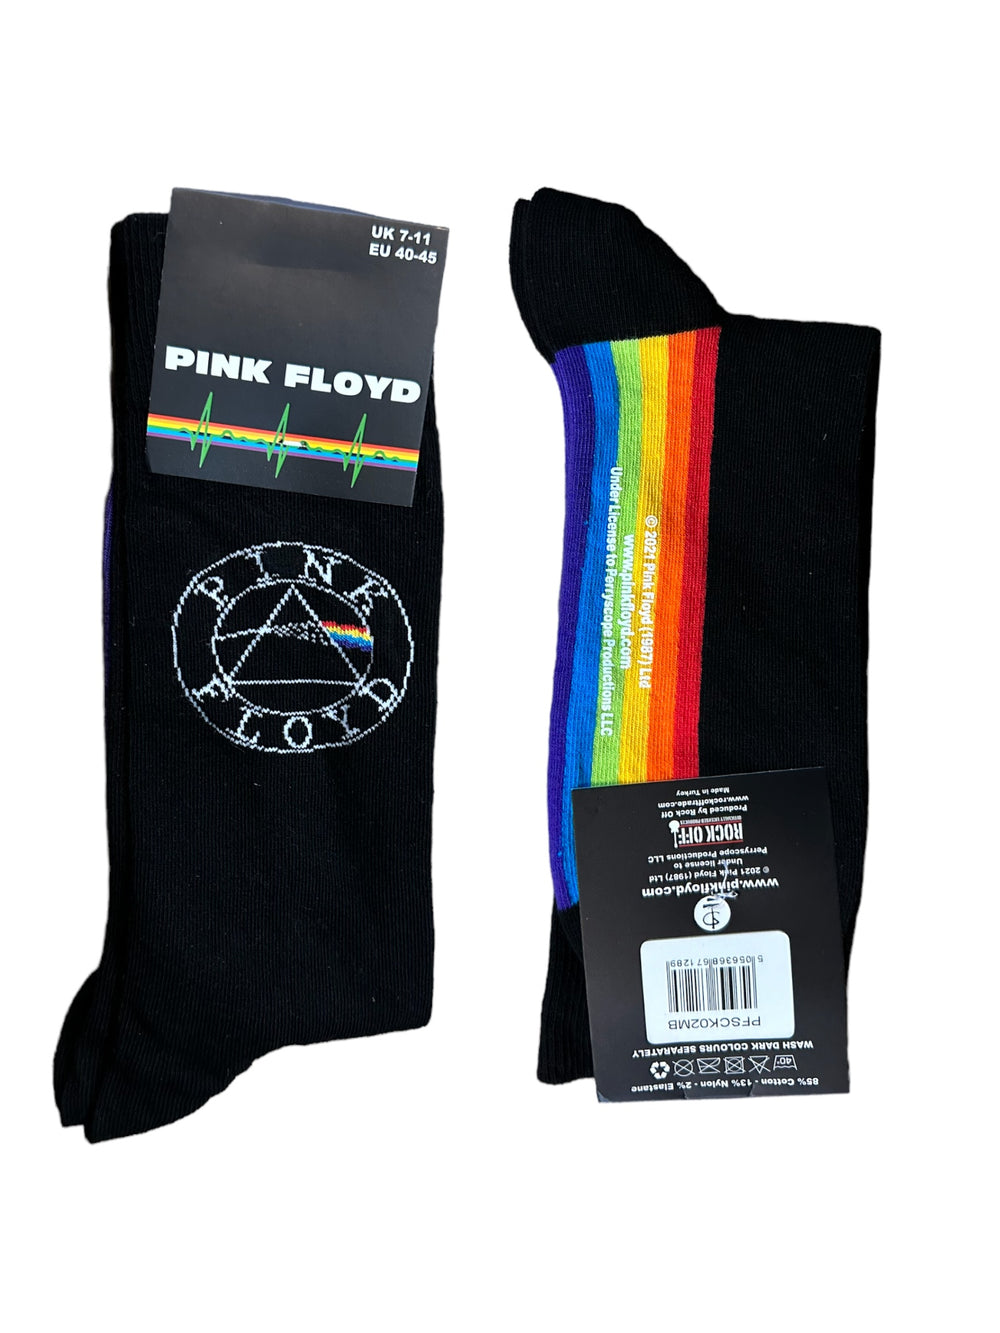 Pink Floyd Spectrum Sole: Official Product 1 Pair Jacquard Socks Brand New